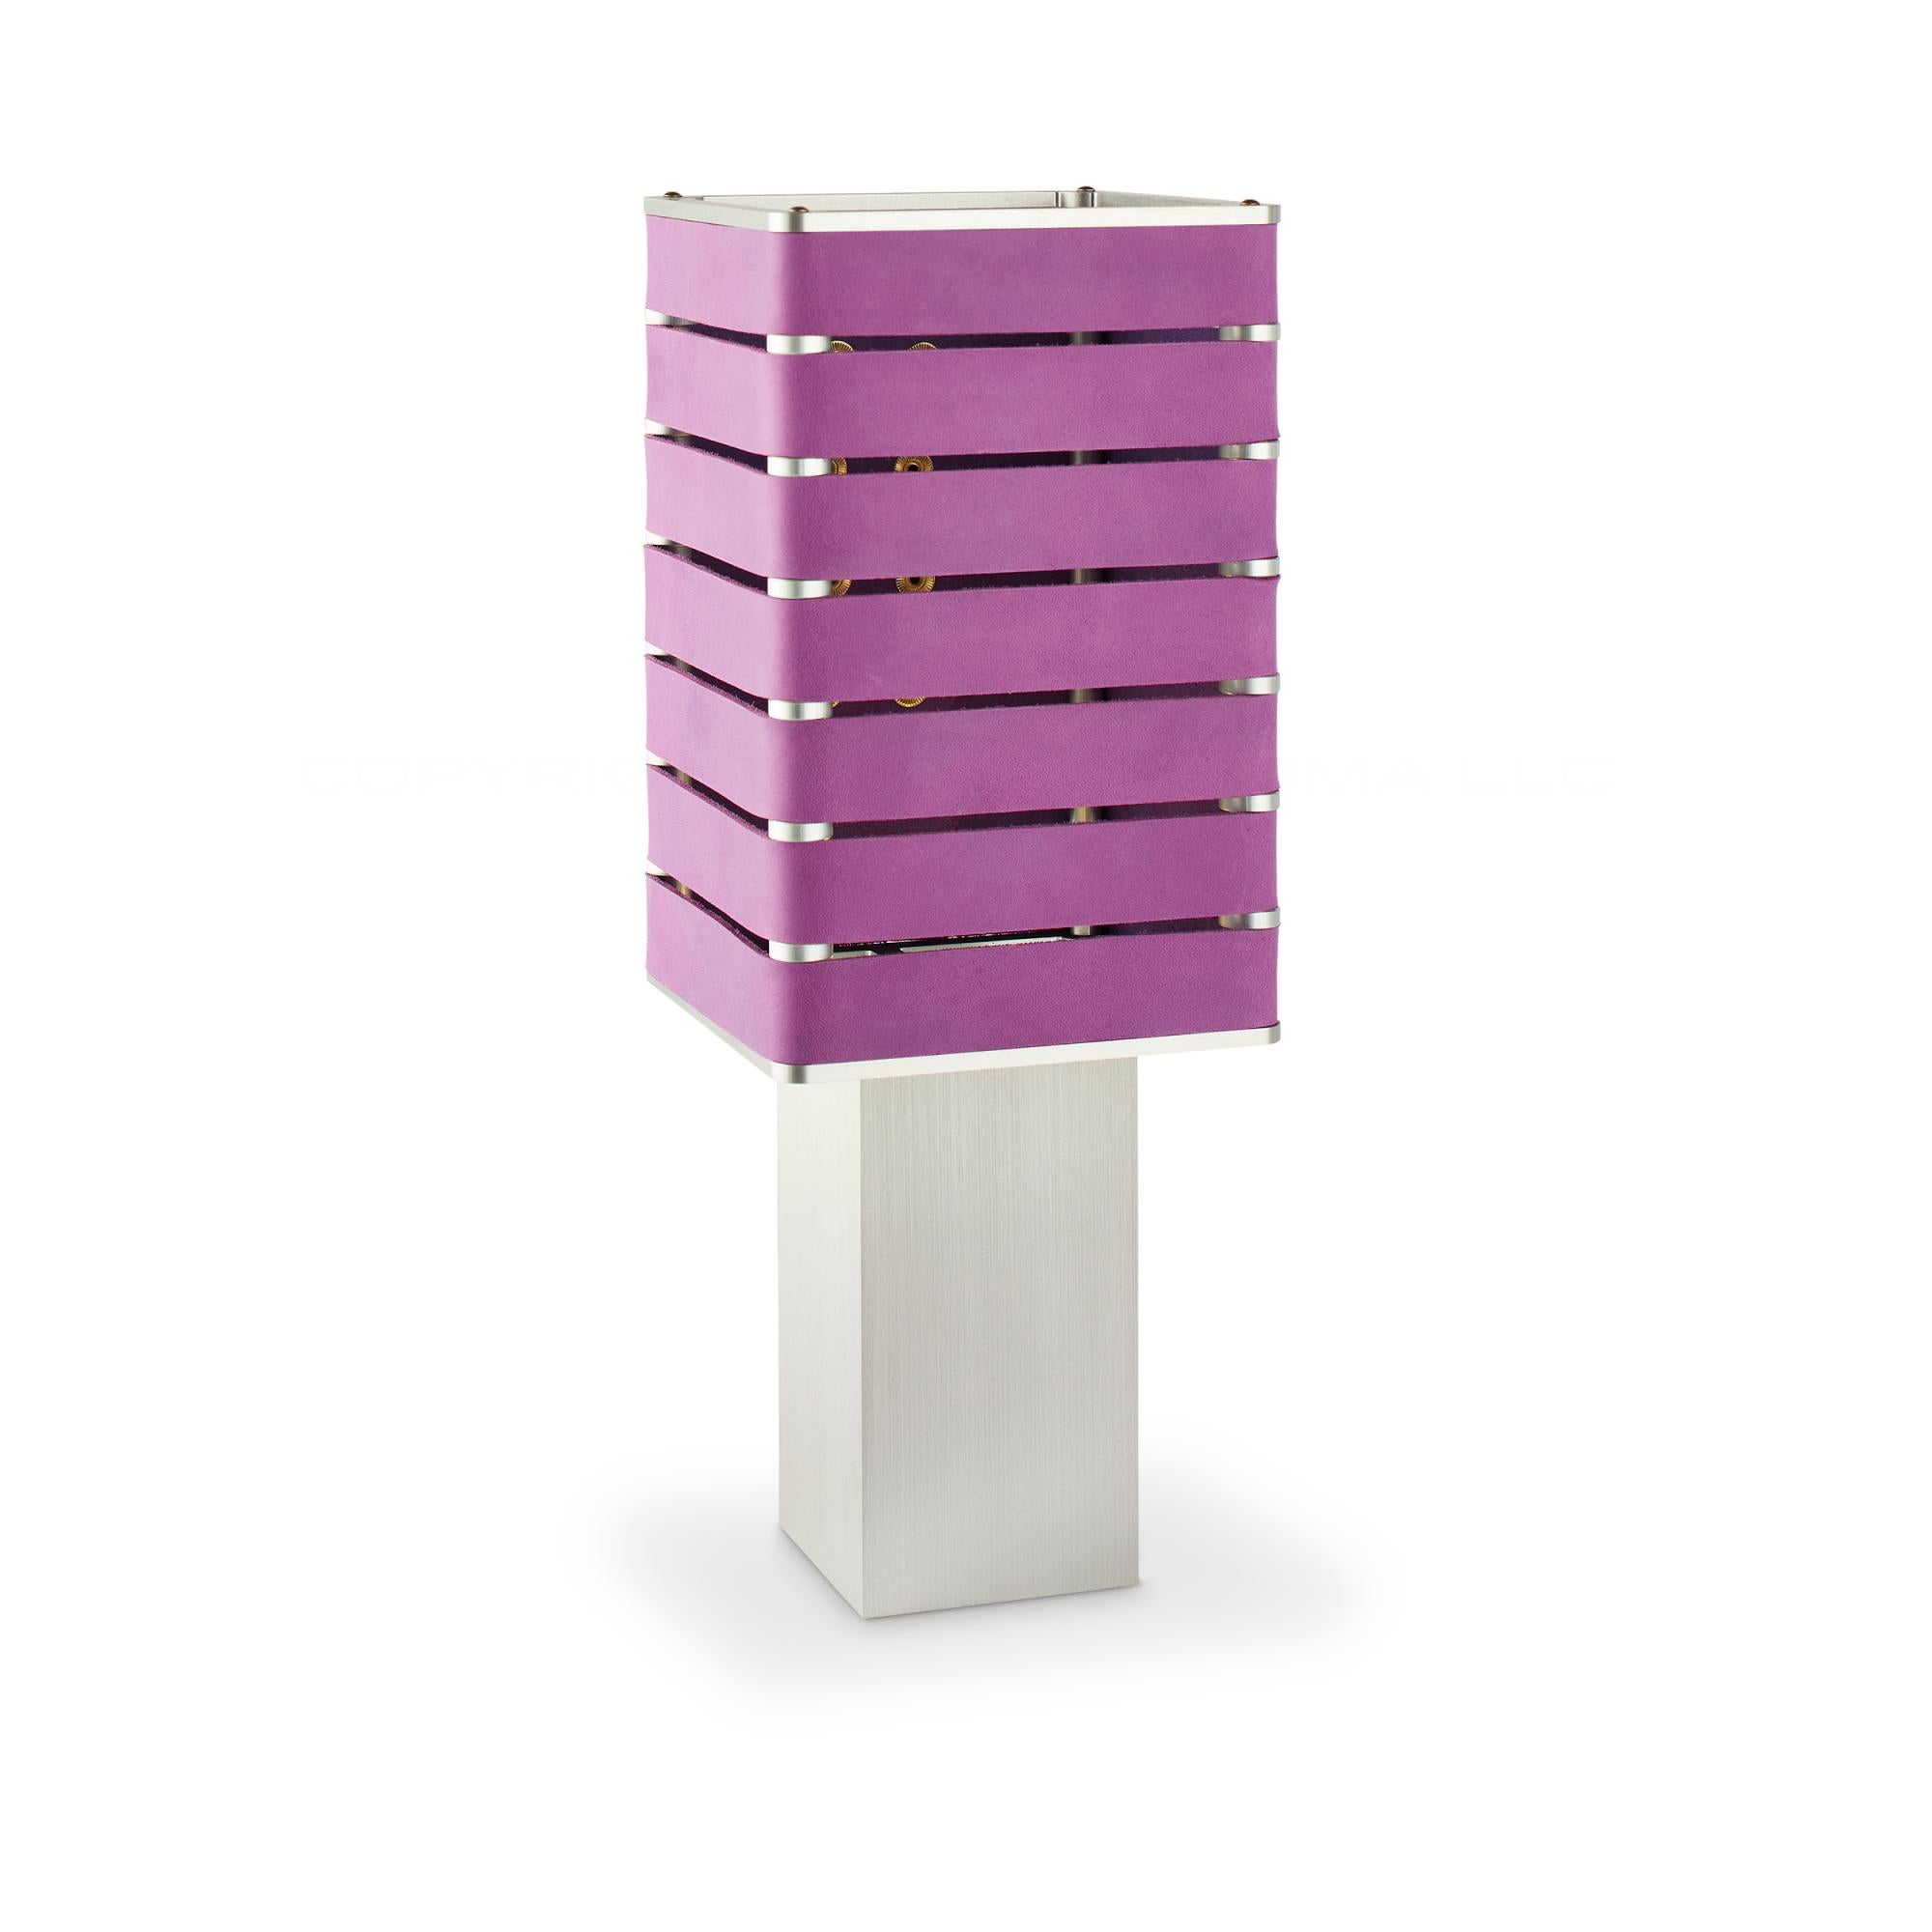 Modern, Minimal, Solid Metal Table Light in Violet Purple Italian Leather with Natural Brass Snaps.

Introducing Exigen, the customizable lighting platform from mnima.  Presented in an array of crisp, eye-catching colors, Exigen offers maximum